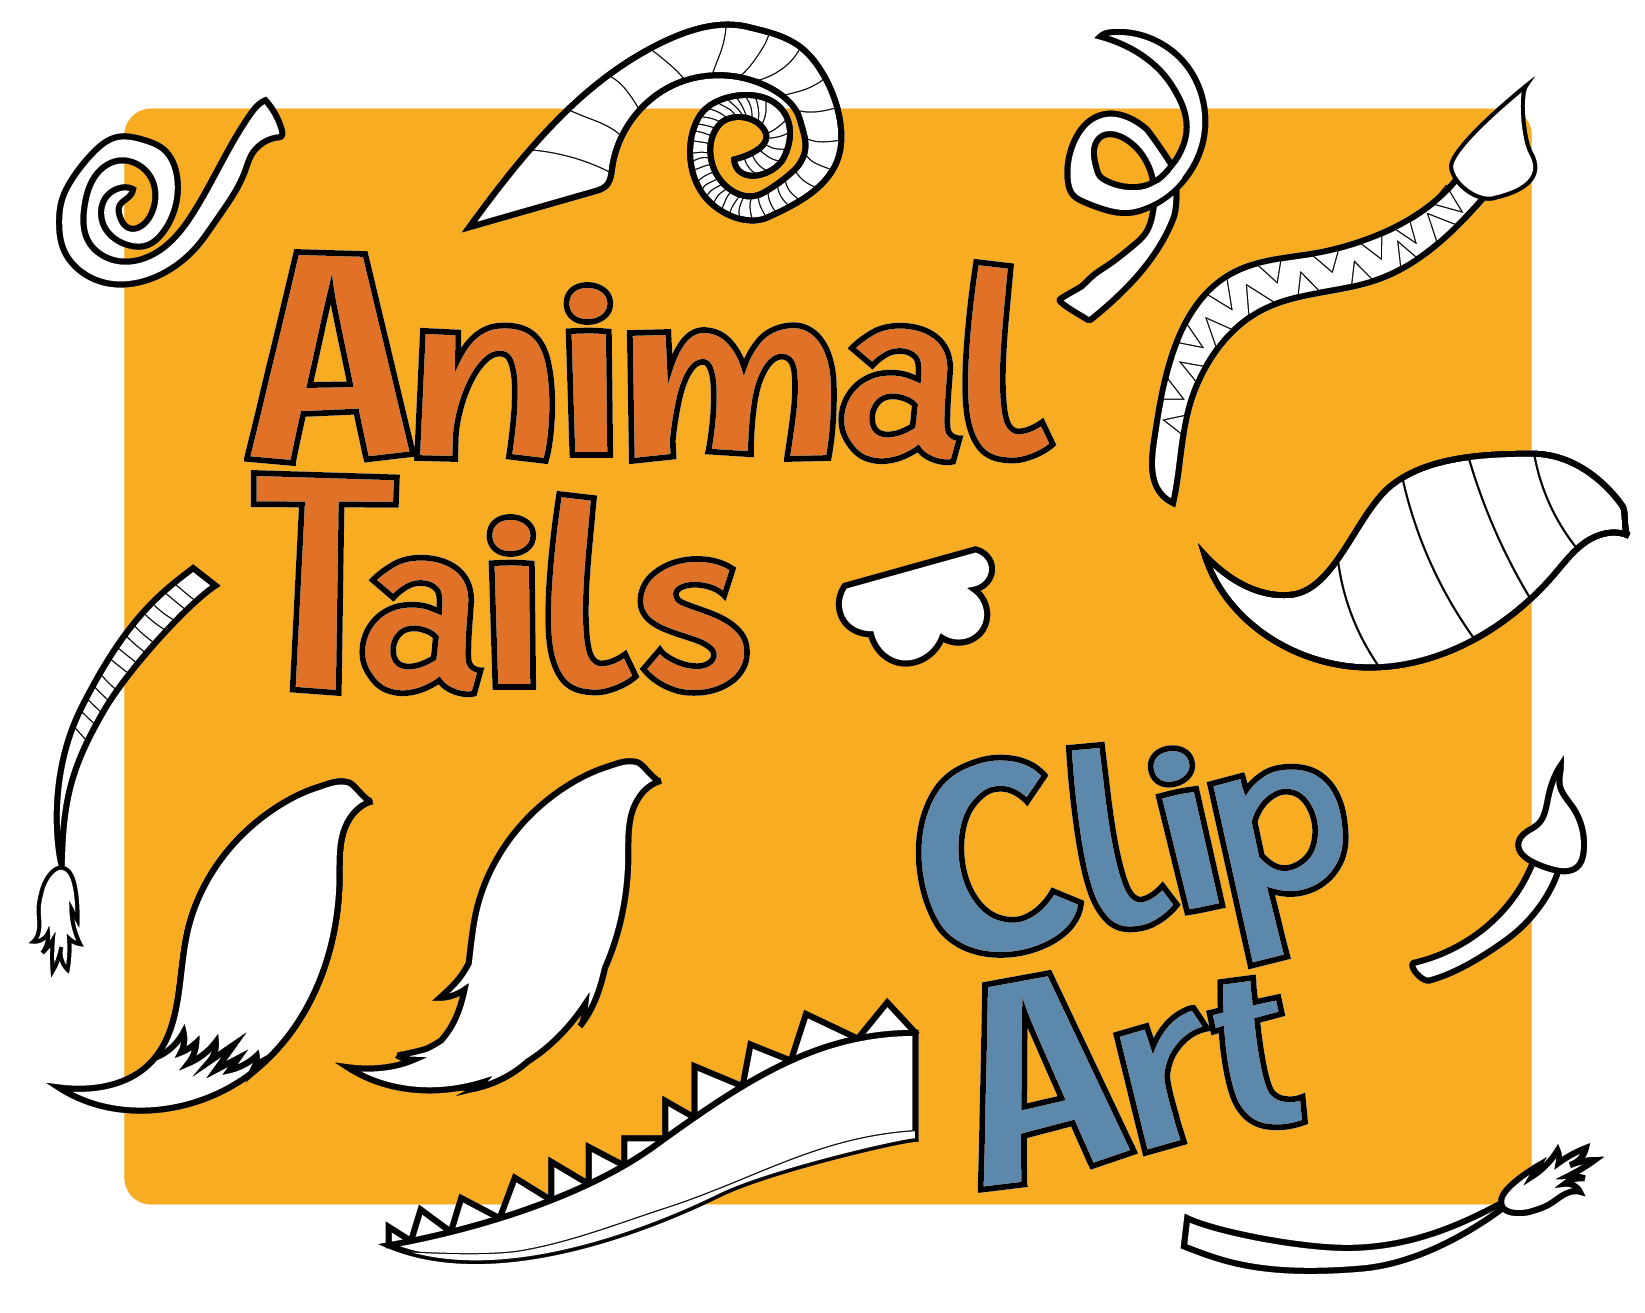 Colorable Black and White 20 Animal Tails Clip Art in PNG file – Lightdots